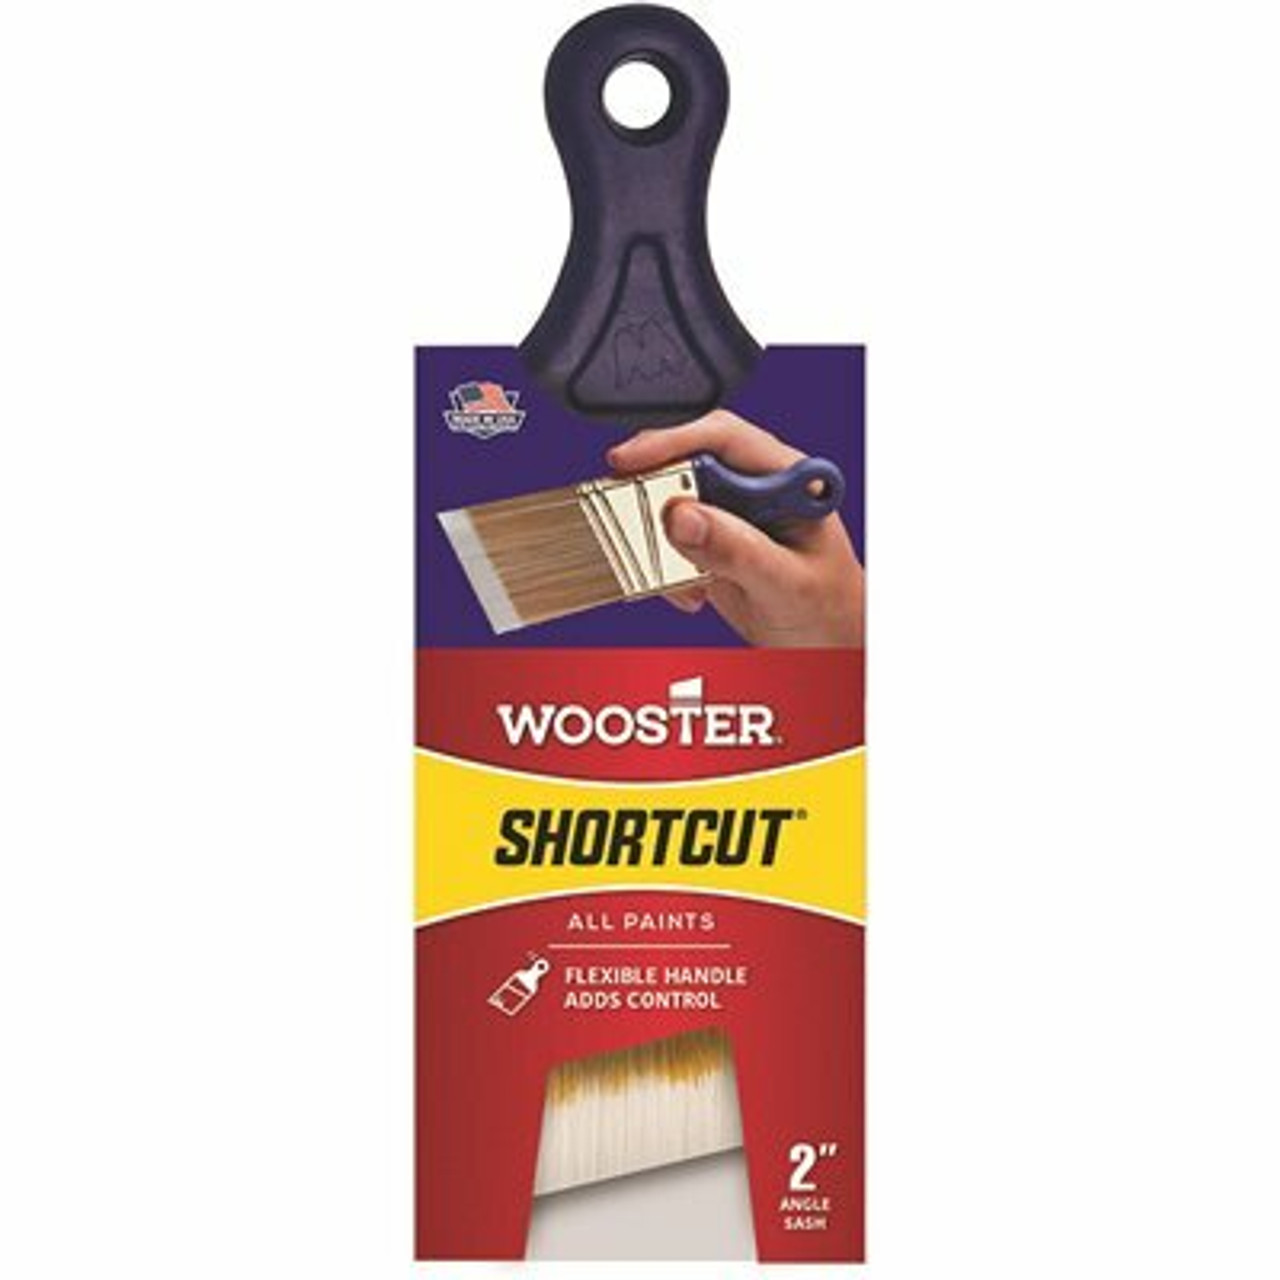 Wooster 2 In. Shortcut Polyester Angle Sash Brush